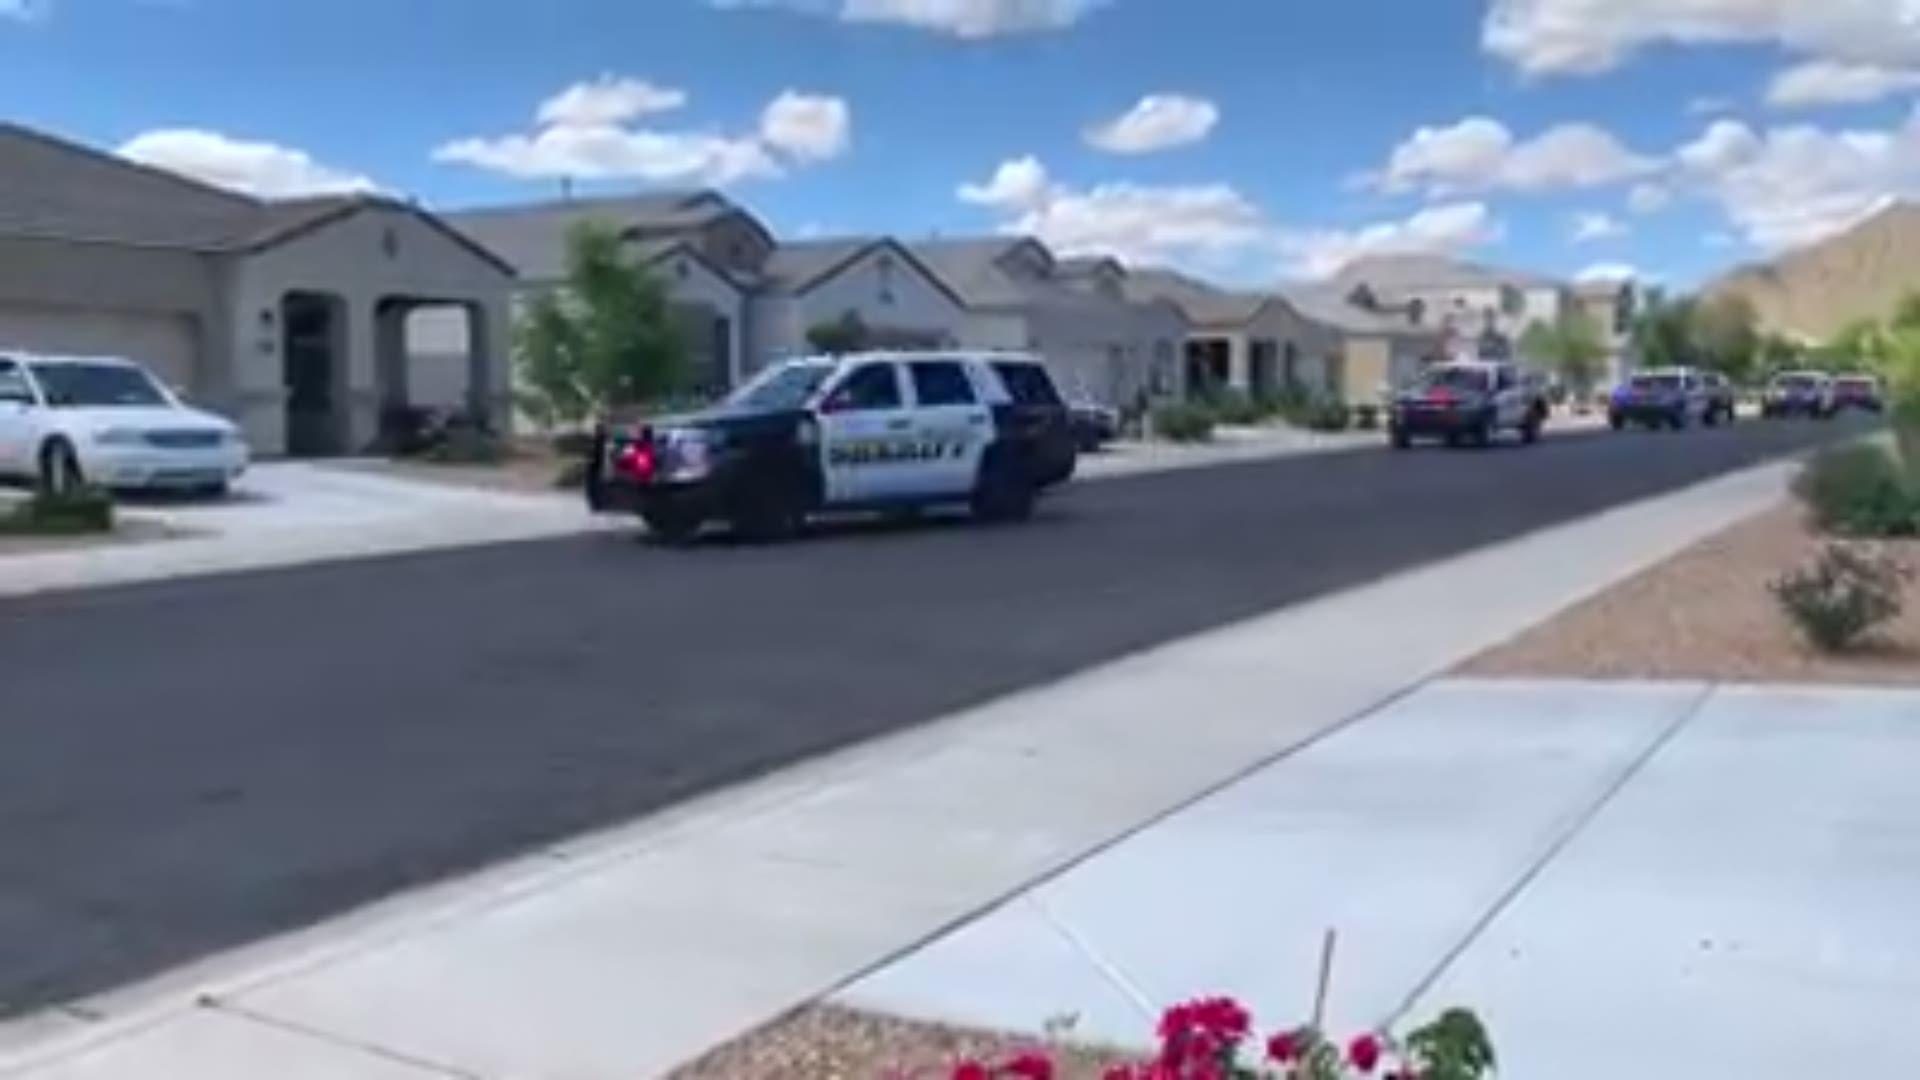 You only turn seven once. The Pinal County Sheriff's office heard it was Alayna's birthday! So they decided to deliver her a special surprise.